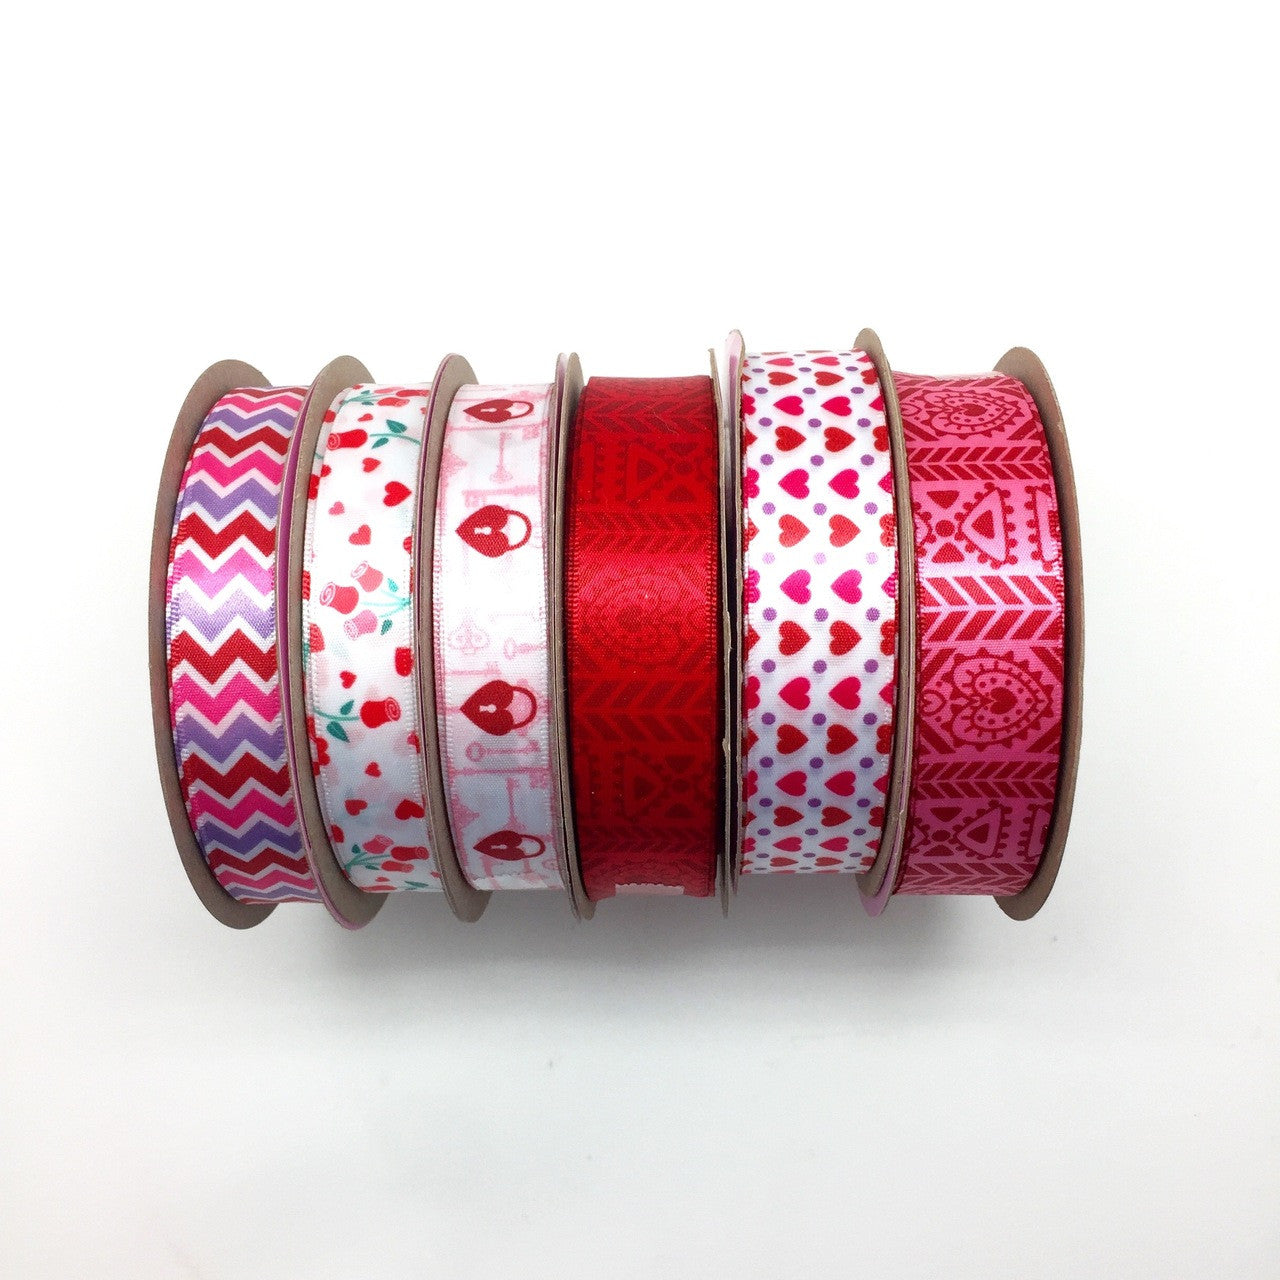 Our 2019 Valentine collection includes Hearts and Dots! Be sure to have several of these beautiful ribbons to mix and match to enhance all your  Valentine gifts, favors, party decor and DIY projects!